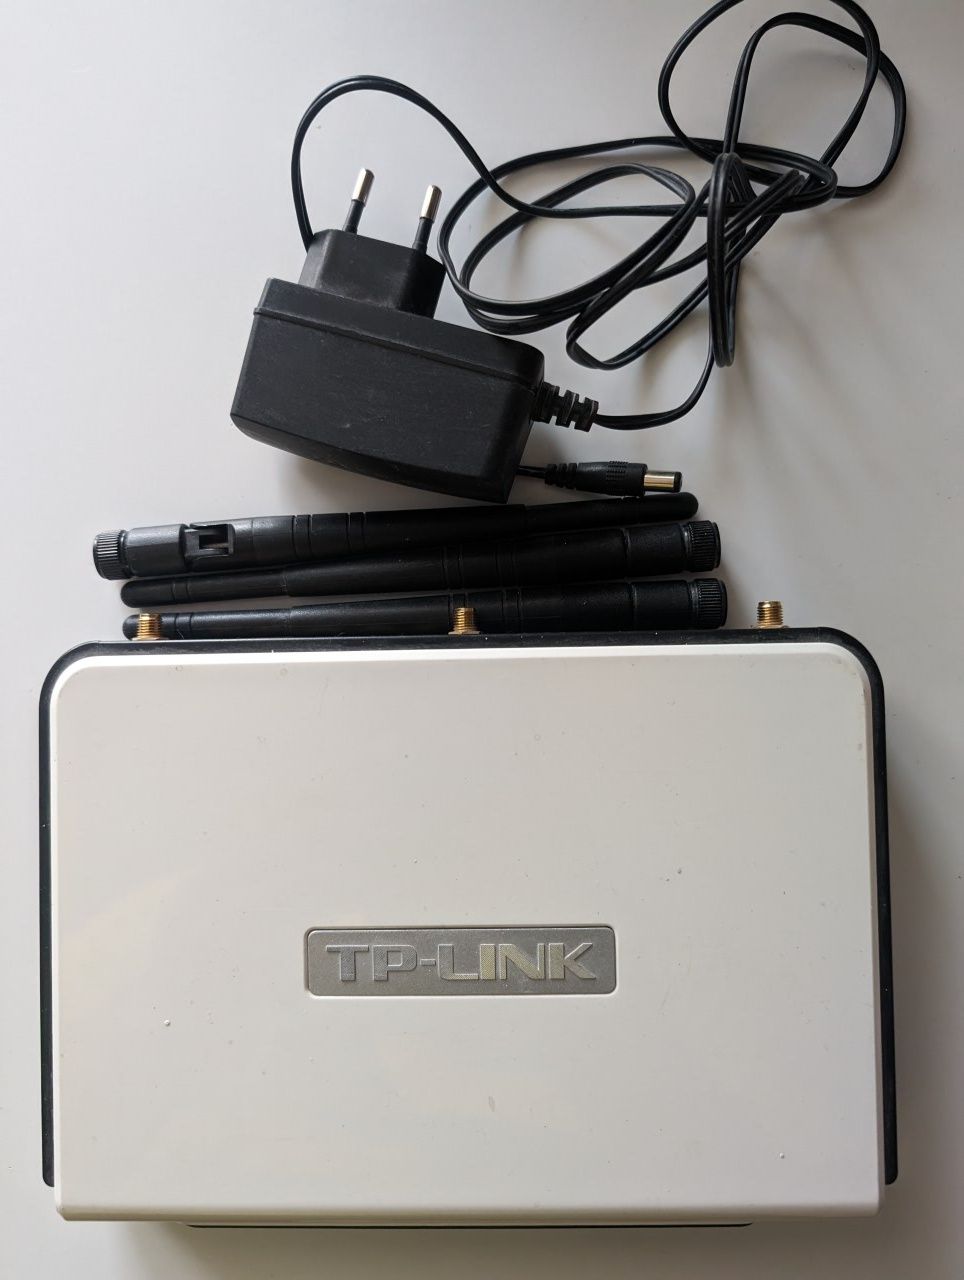 Router TP-Link TL-WR941ND